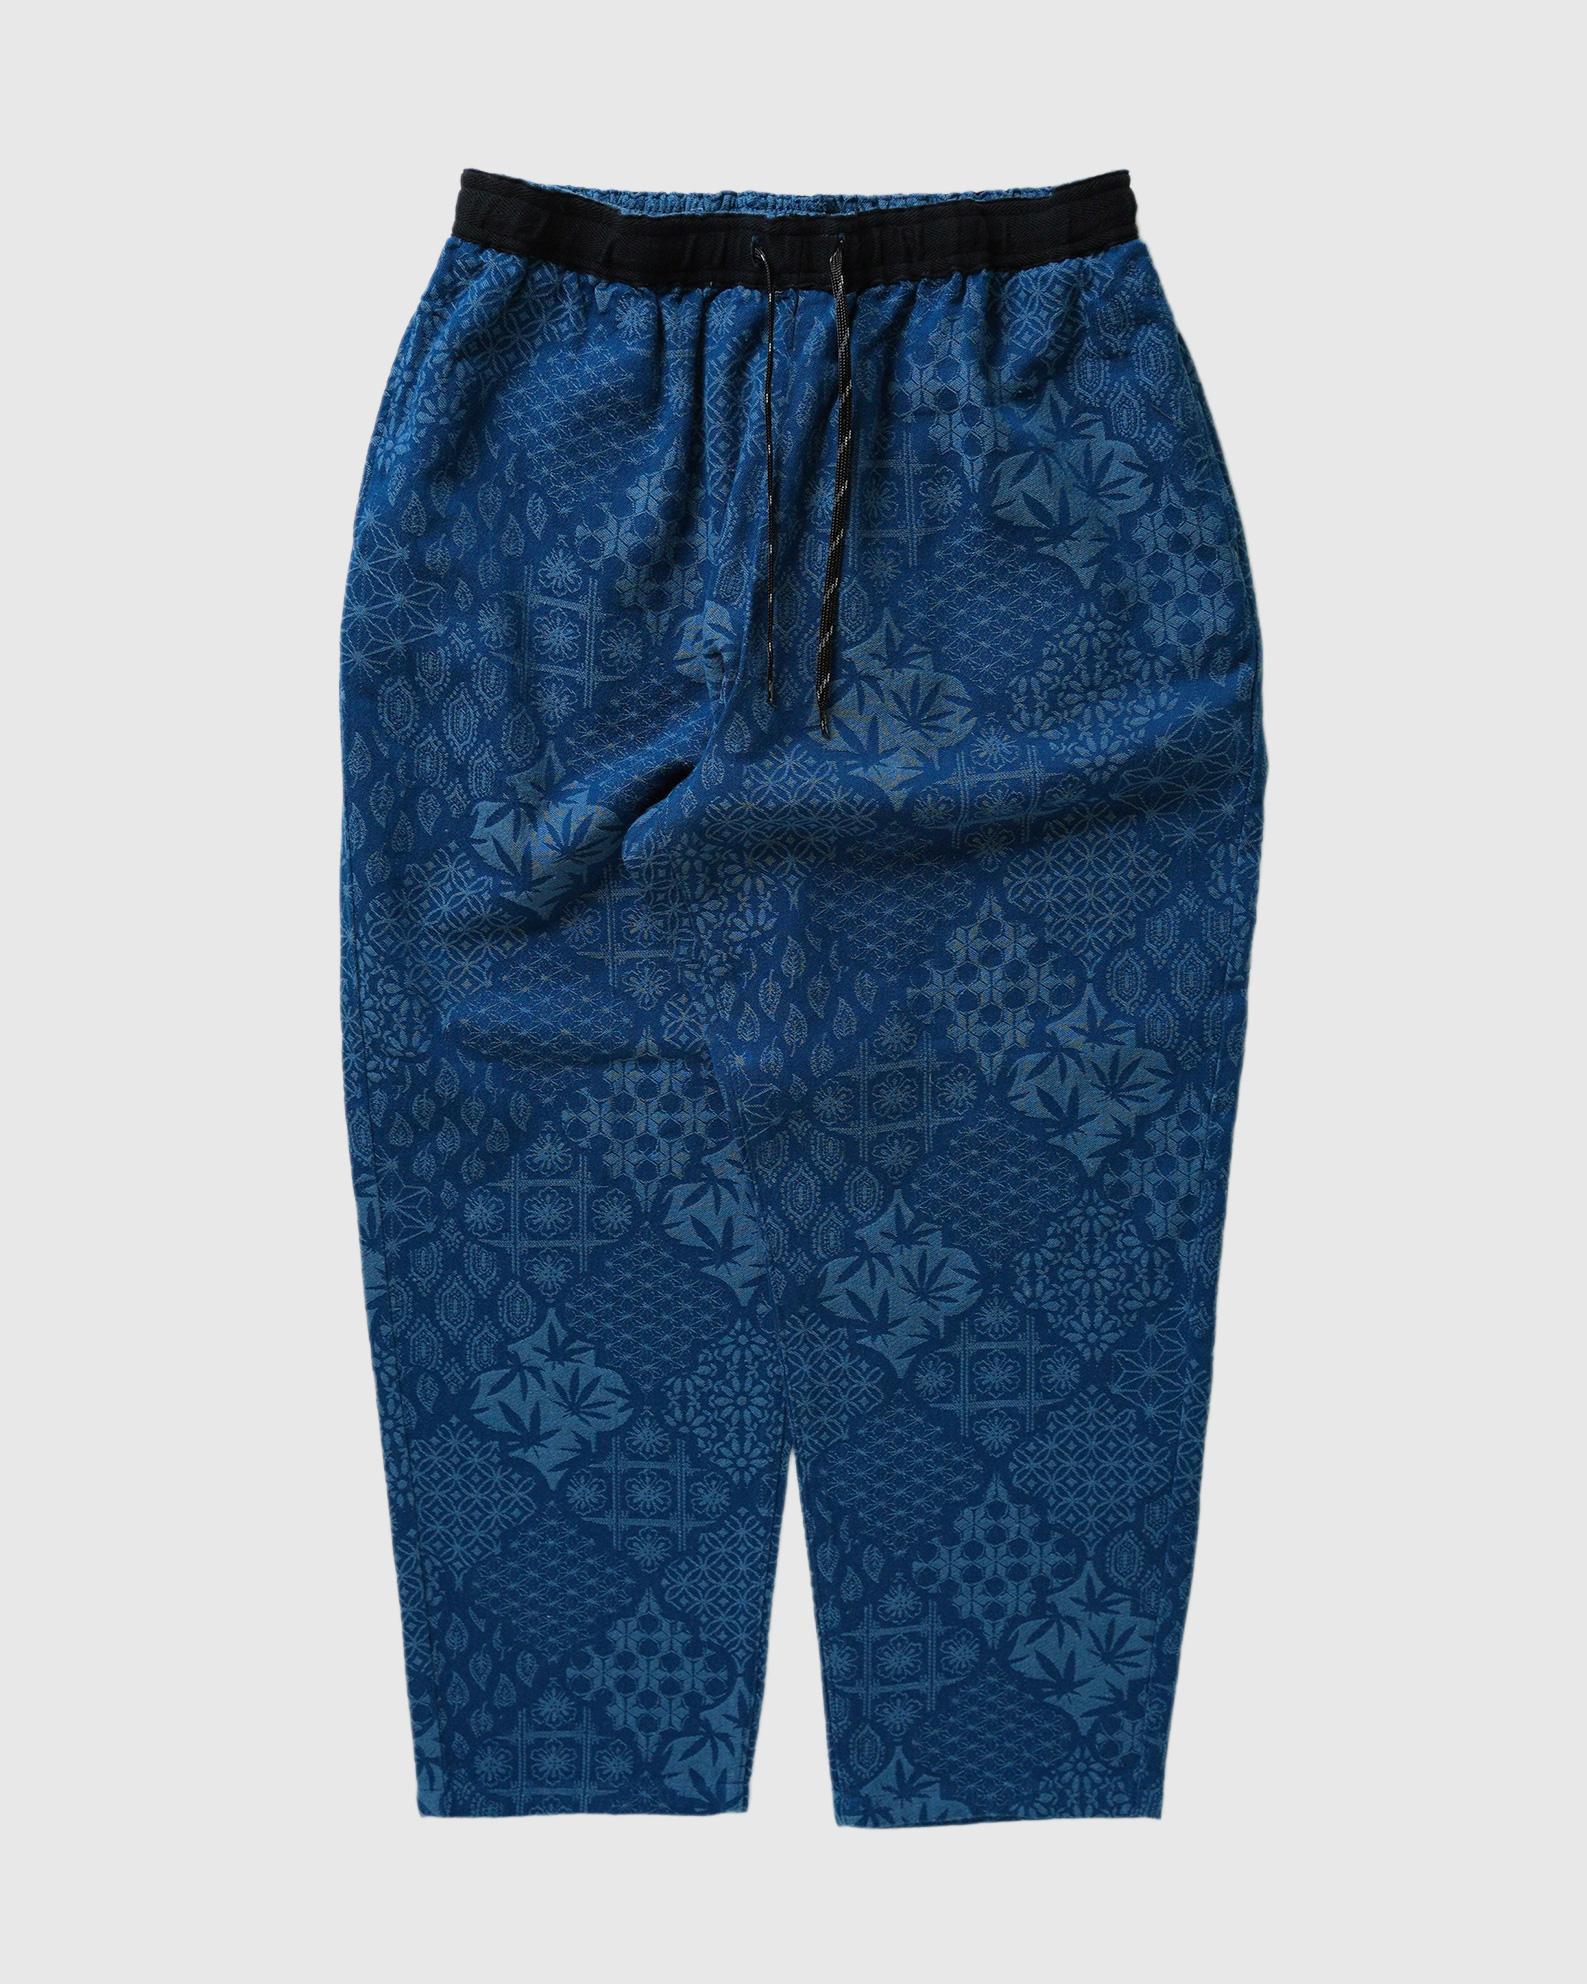 NEW DAY PANTS